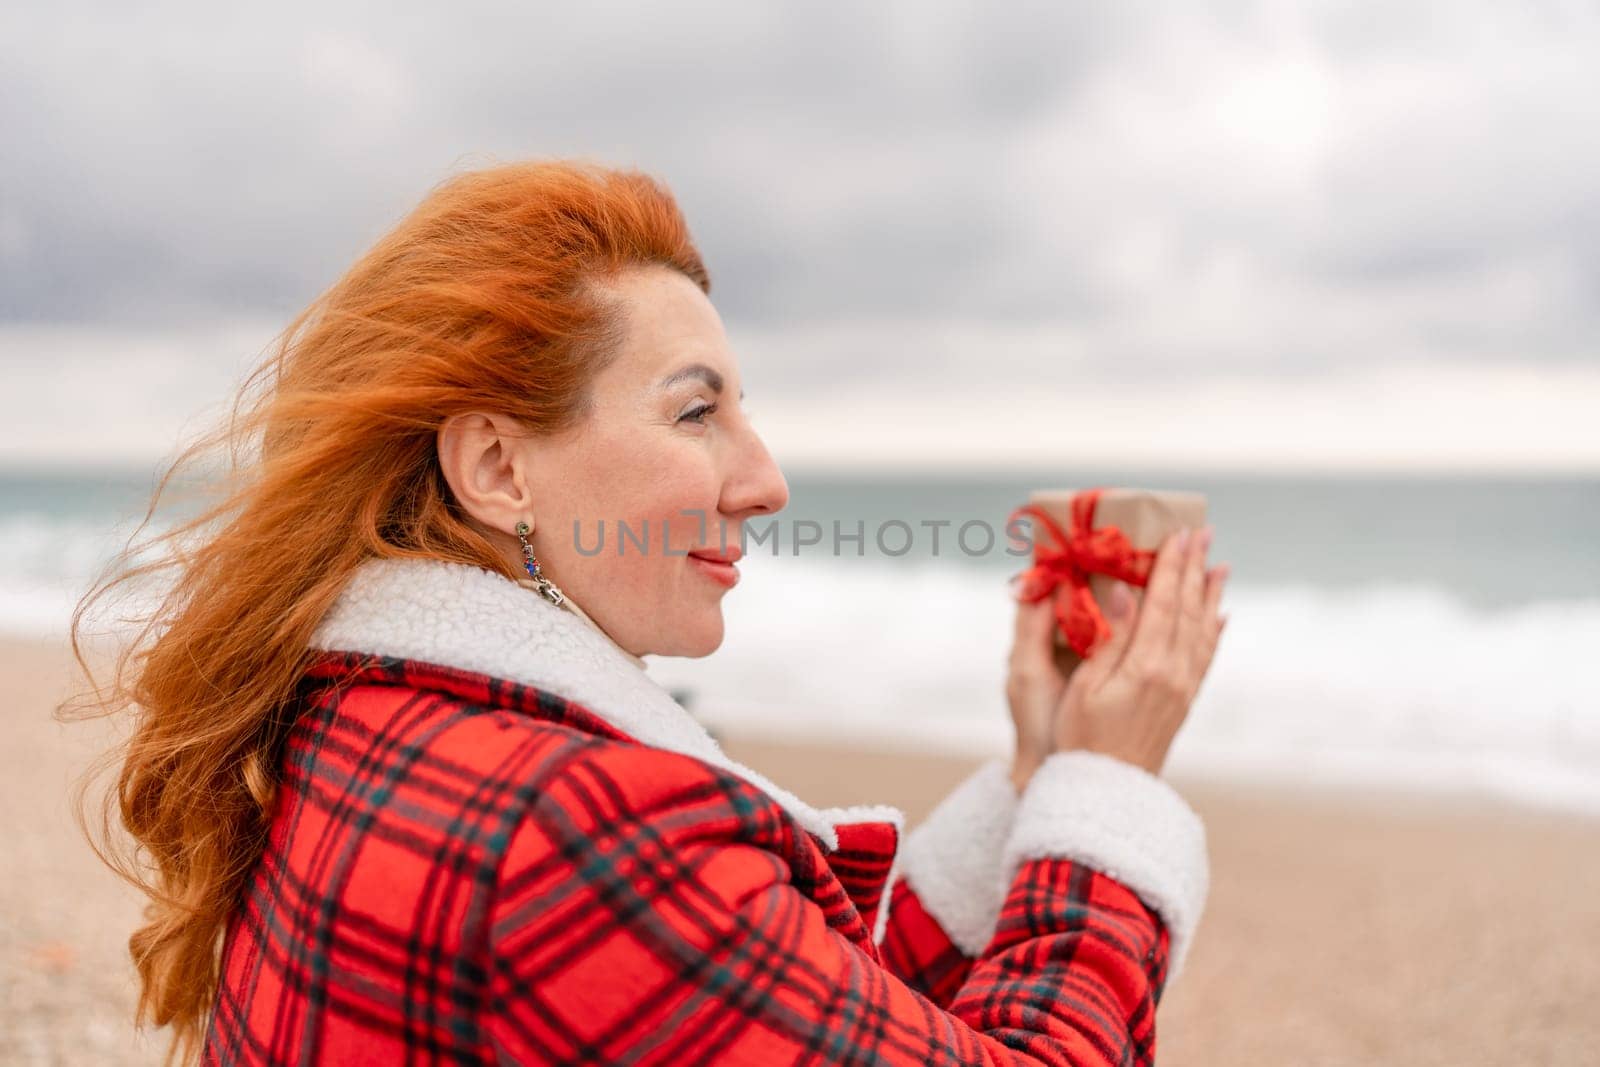 Lady in plaid shirt holding a gift in his hands enjoys beach. Coastal area. Christmas, New Year holidays concep by Matiunina